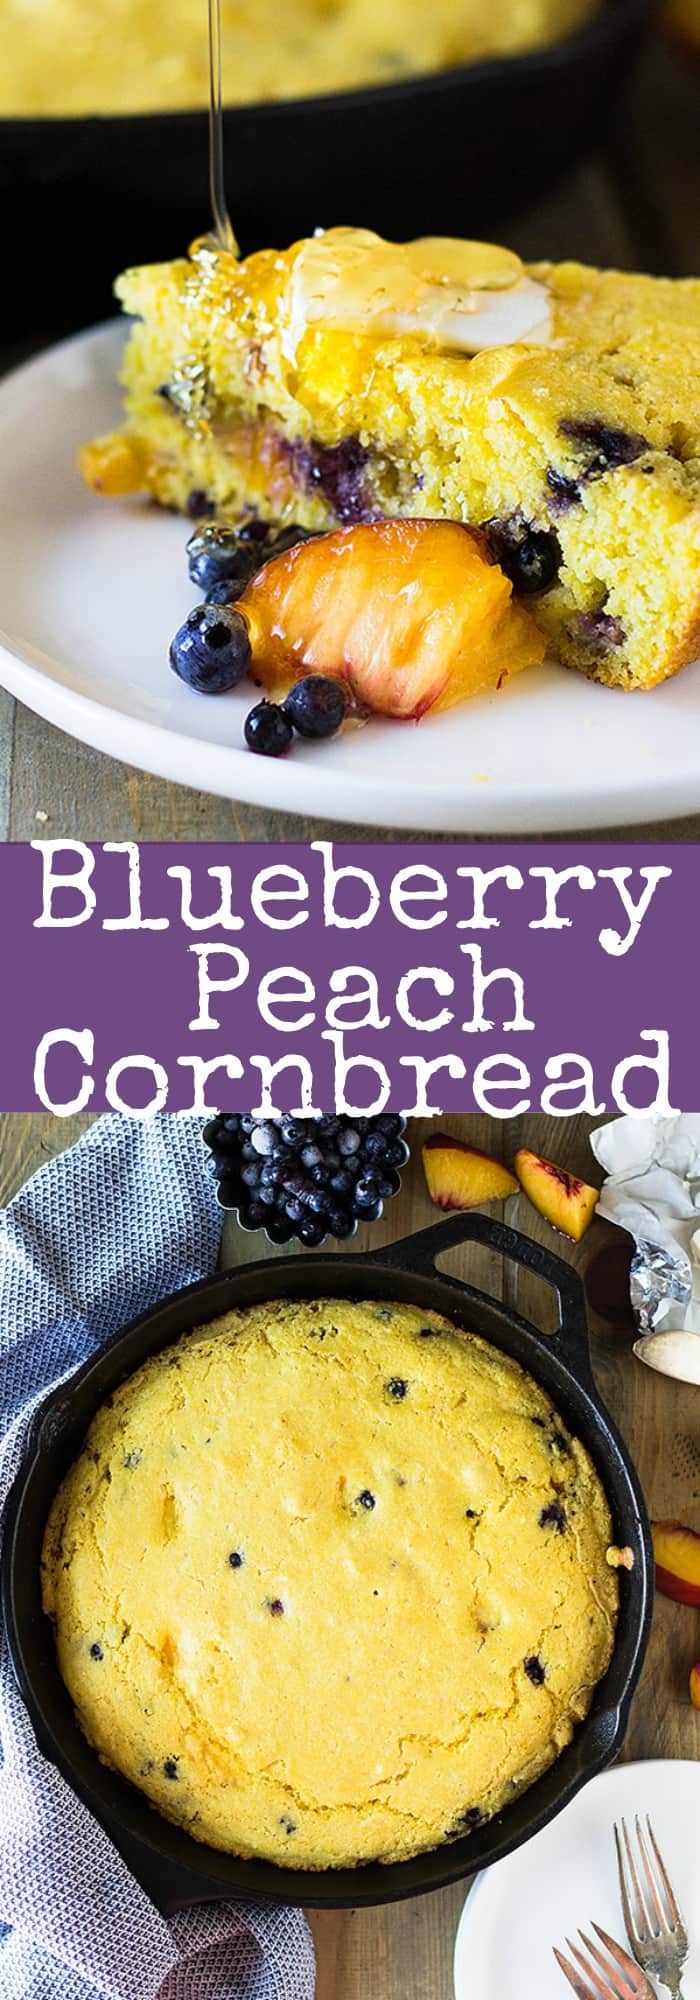 Blueberry Peach Cornbread made with buttermilk, studded with fresh blueberries and peaches will be your new favorite breakfast treat! | www.countrysidecravings.com